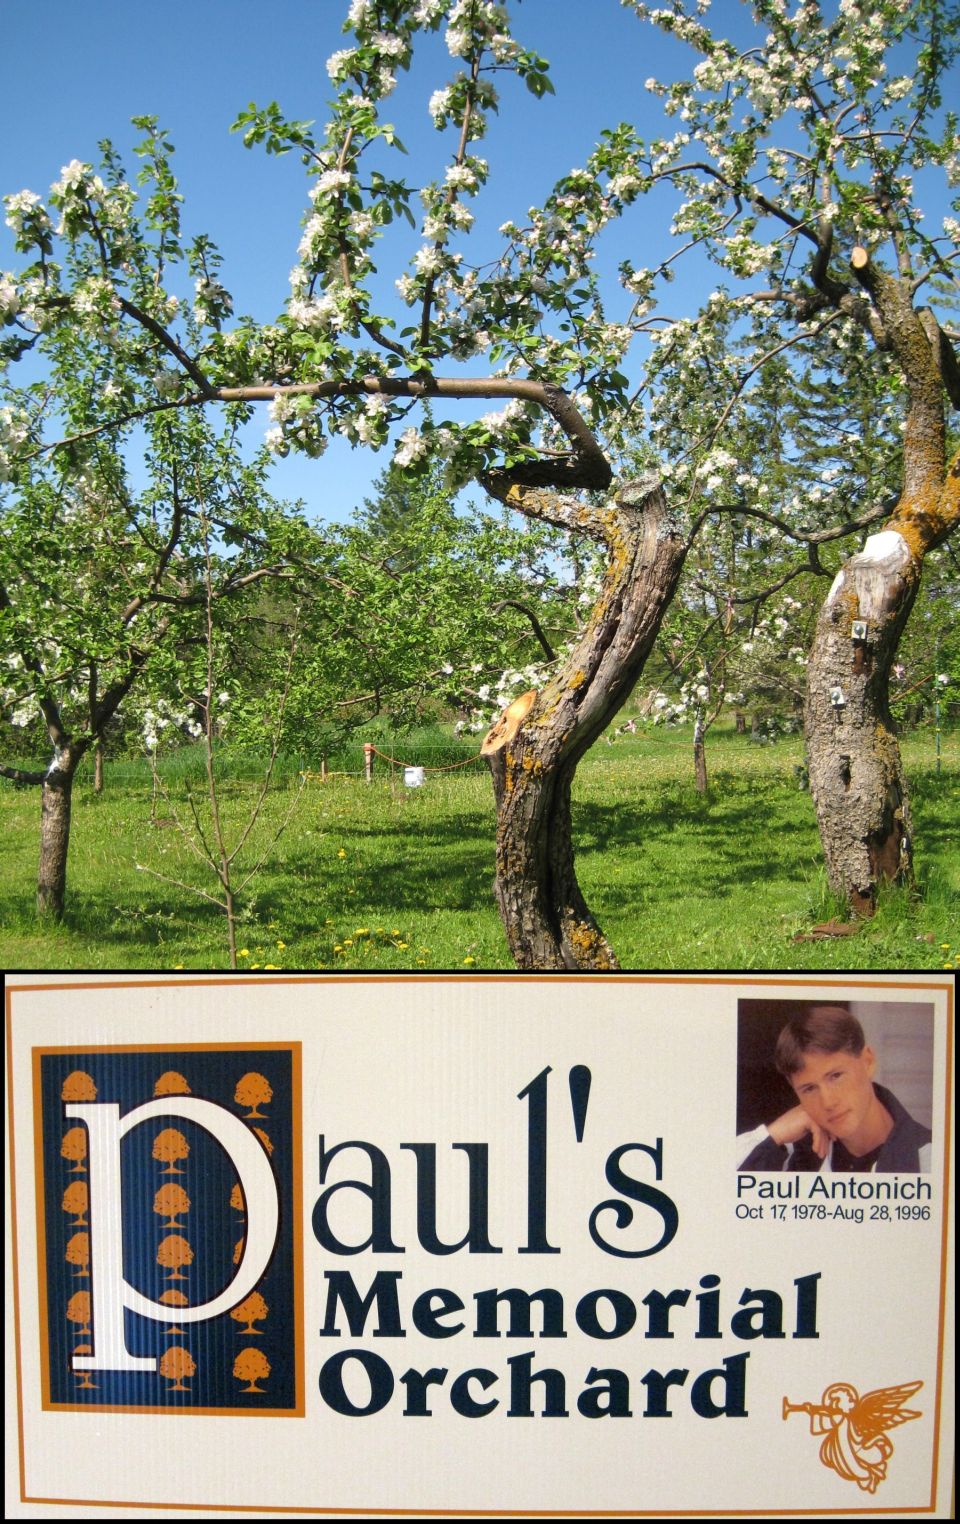 An orchard is seen in the background with blooming trees. In the foreground, a sign reads "Paul's Memorial Orchard" and includes a photo of Paul Antonich, with dates "Oct 17, 1978 - Aug 28, 1996" and a small angel graphic. A nearby plaque mentions his favorite pastime: enjoying coffee in Duluth.